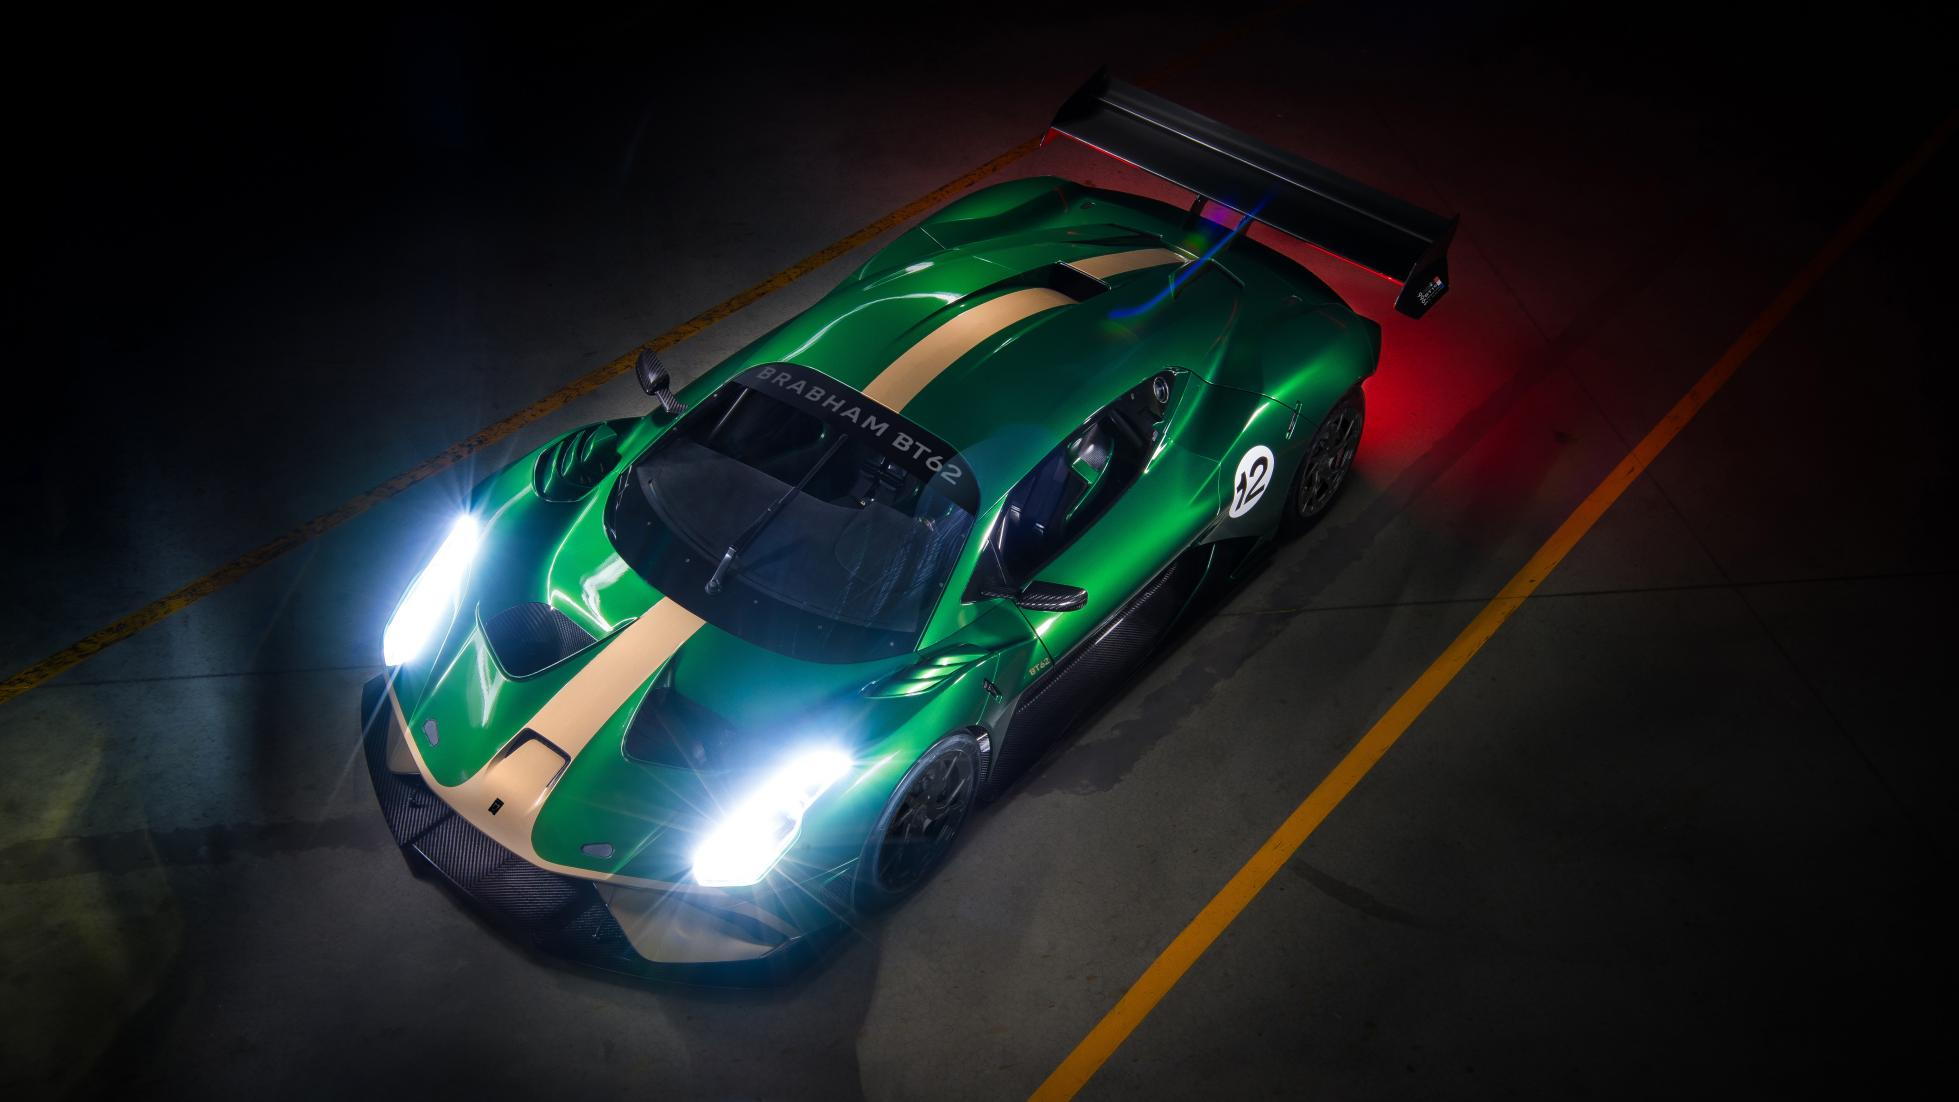 Brabham's follow-up to the BT62 will be a more attainable supercar